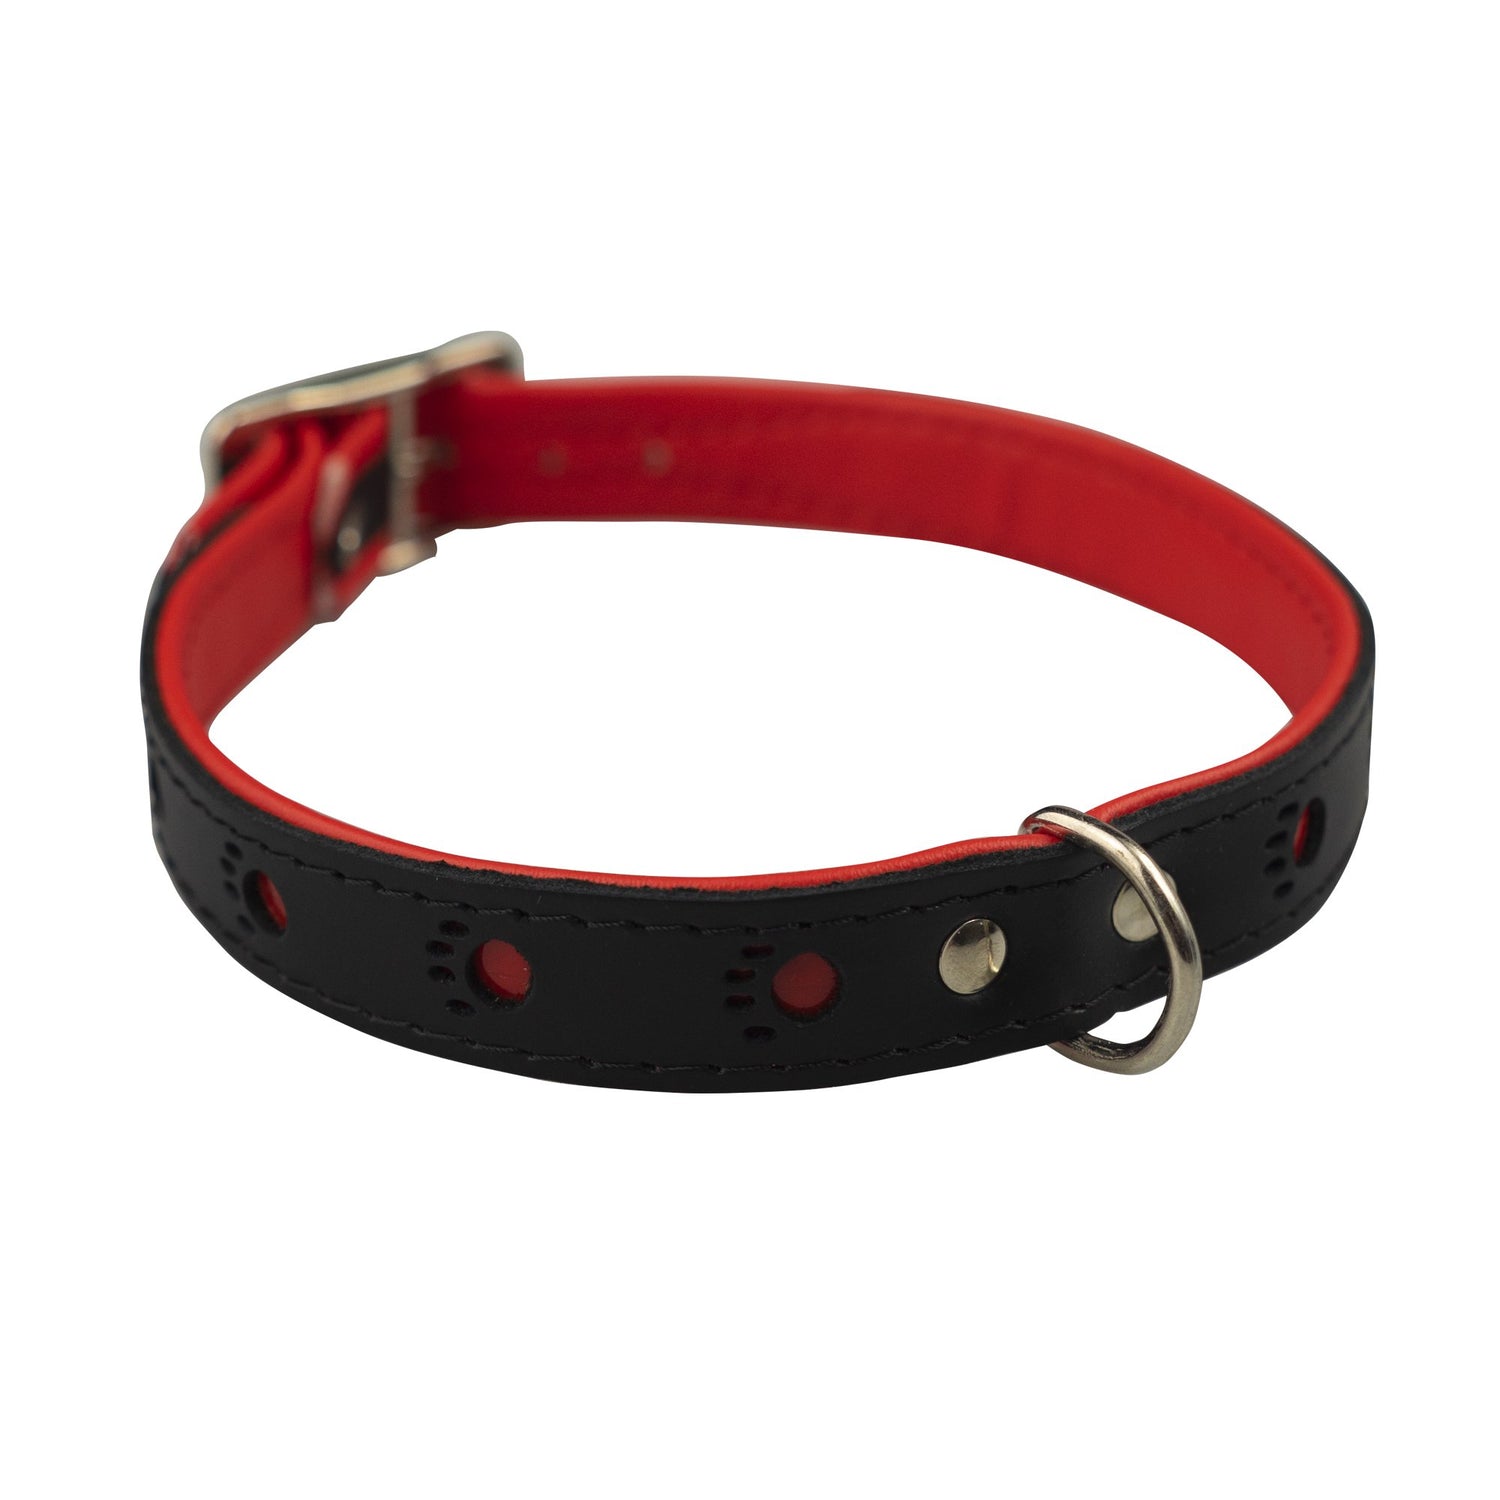 Corspet Genuine Cow Leather Dog Collar - Reflective Dog Collar with Contrasting Colors - Corspet